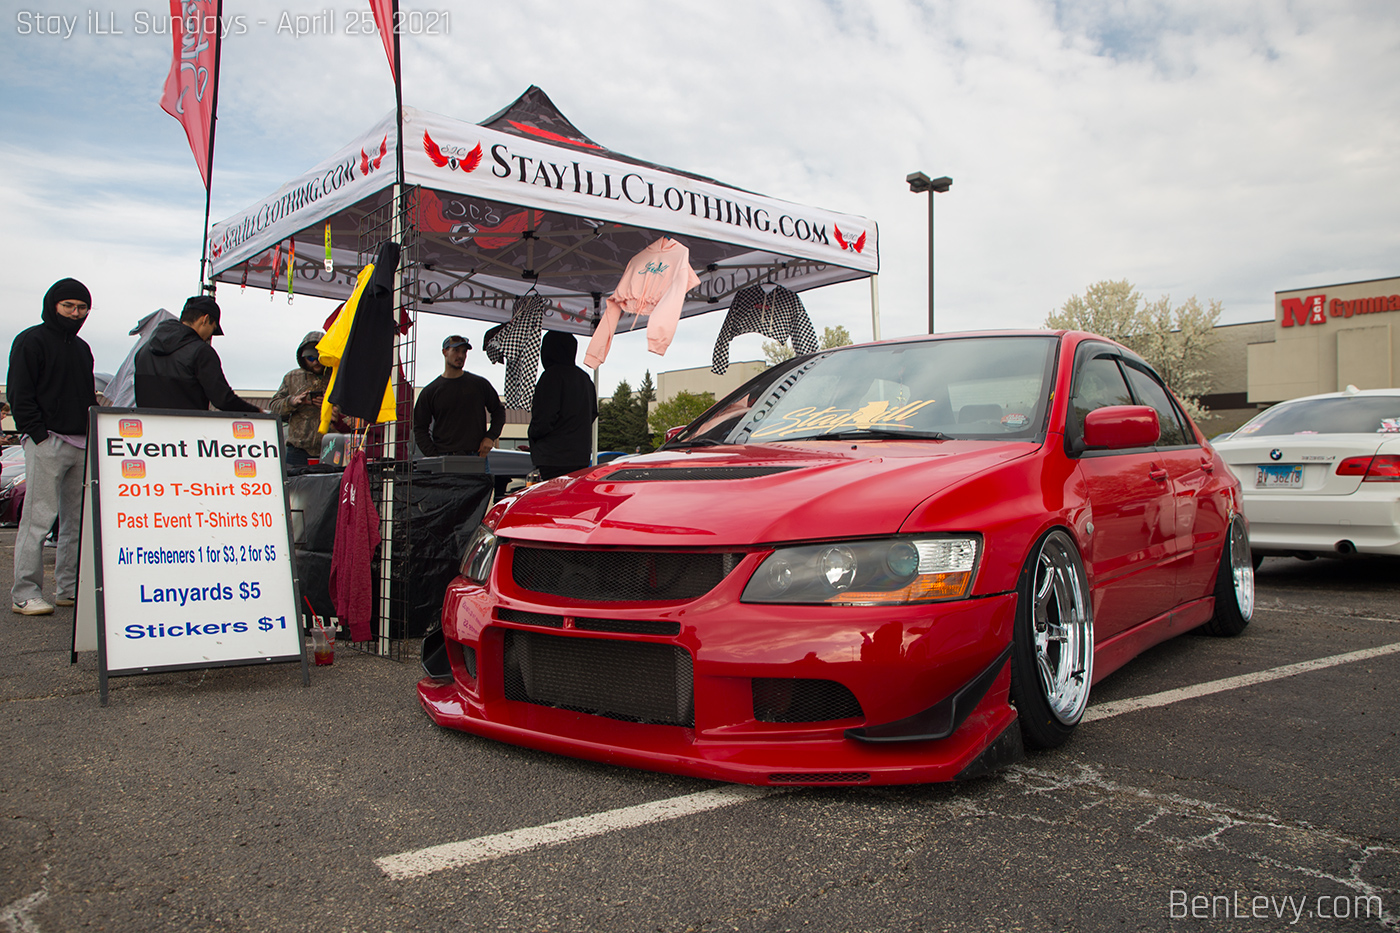 Red Lancer Evolution at Stay iLL Sunday in April 2021